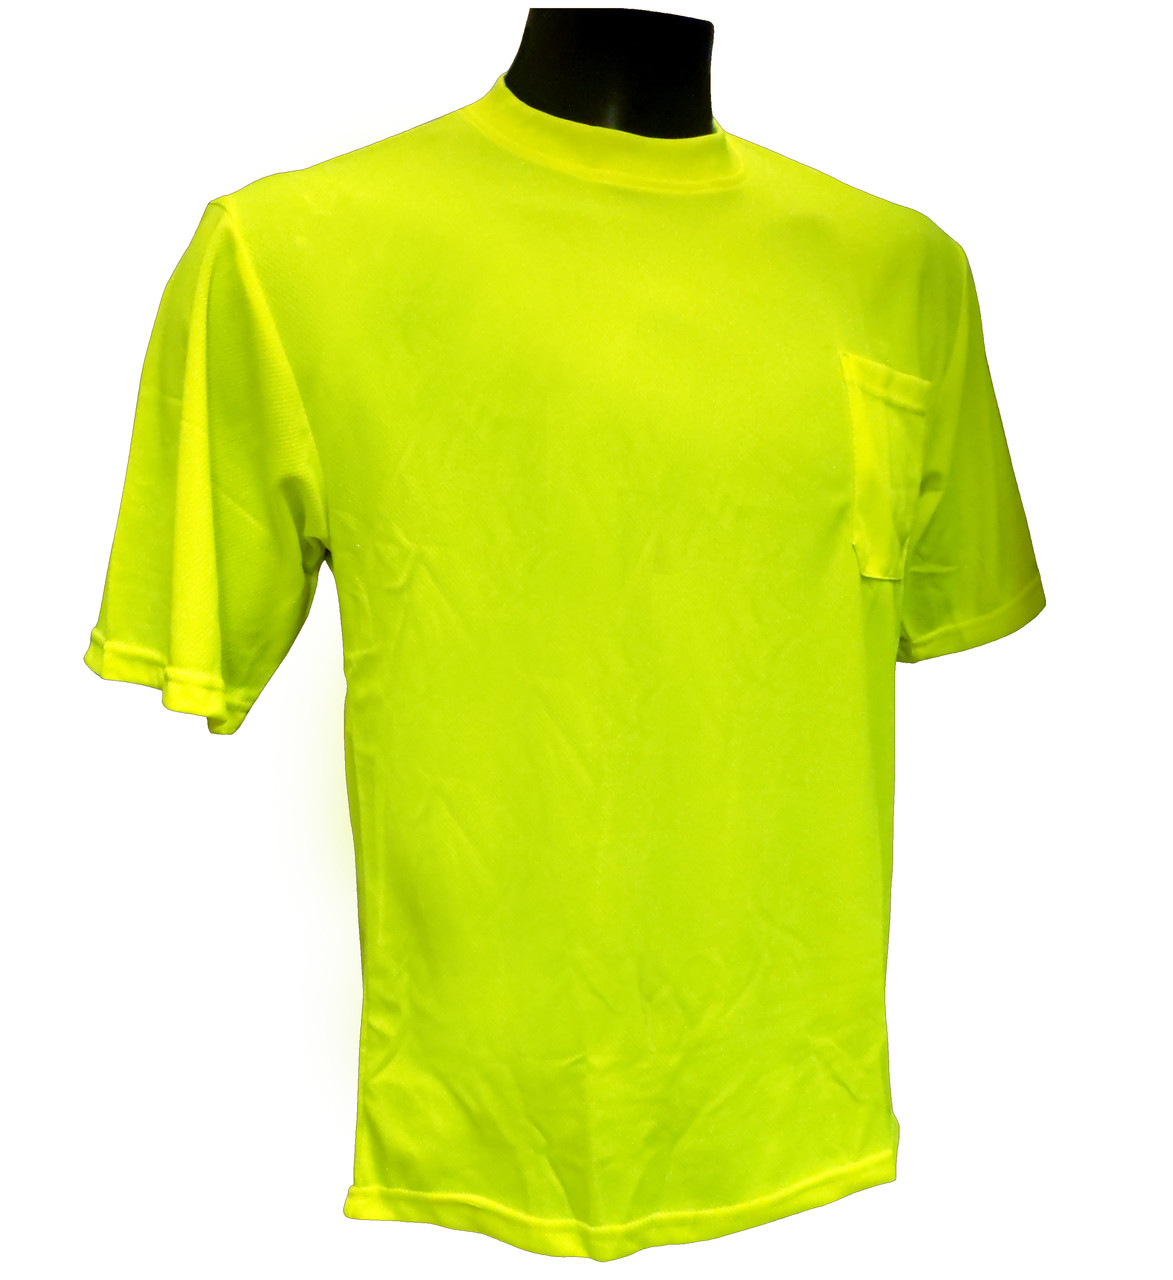 Moister wicking Hi-Vis Knit Lime T-Shirts-FRONT